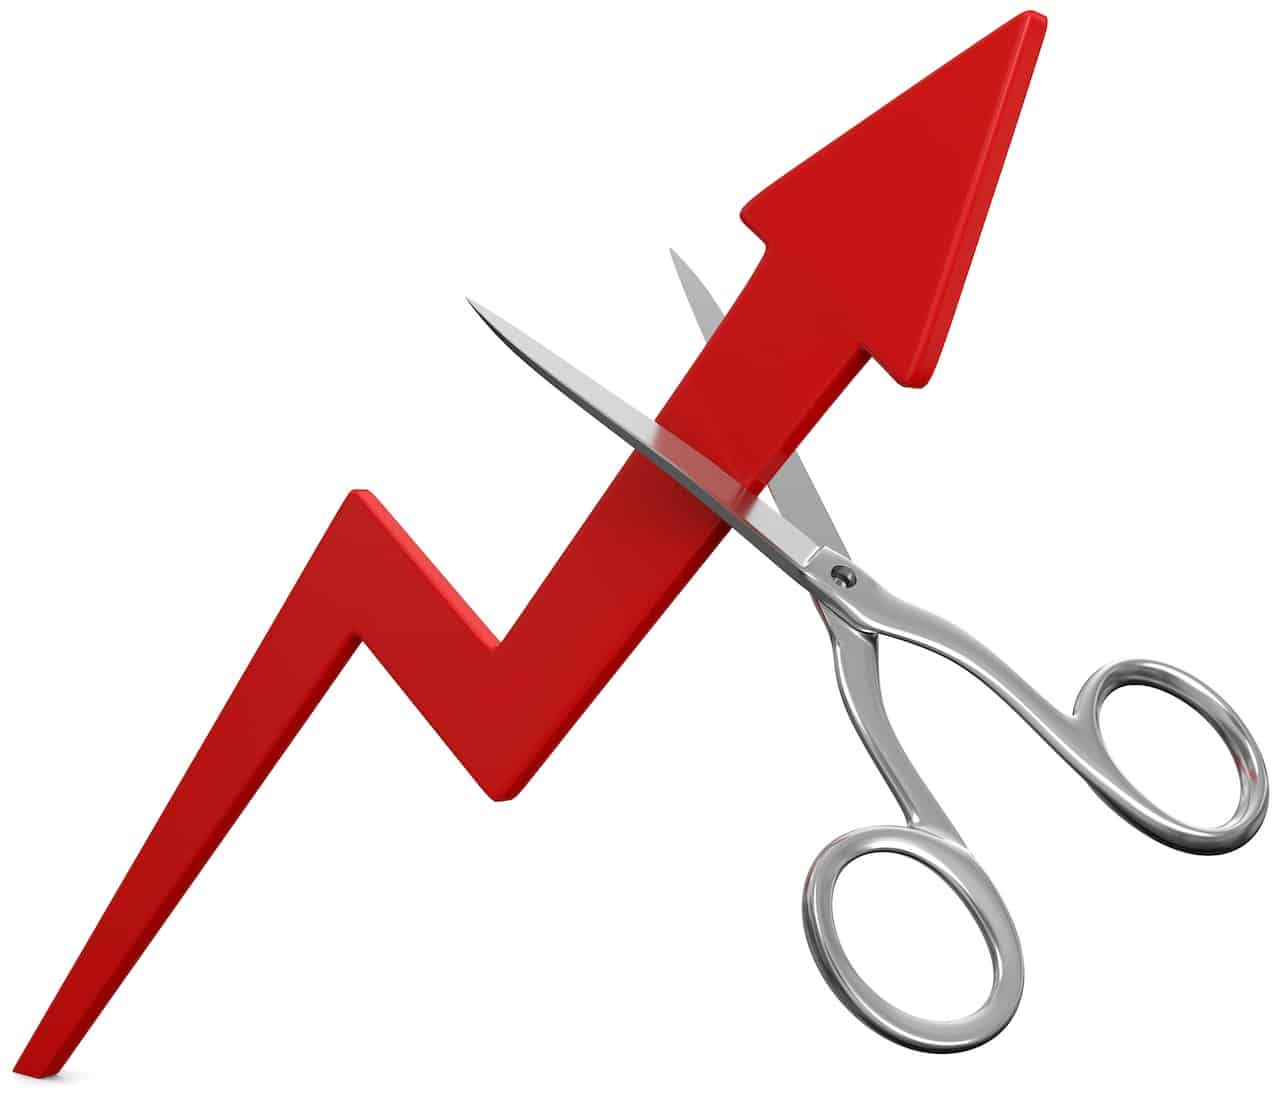 Cutting Ties: Symbolic Scissors Severing a Red Arrow - Analyzing the End of Inflation